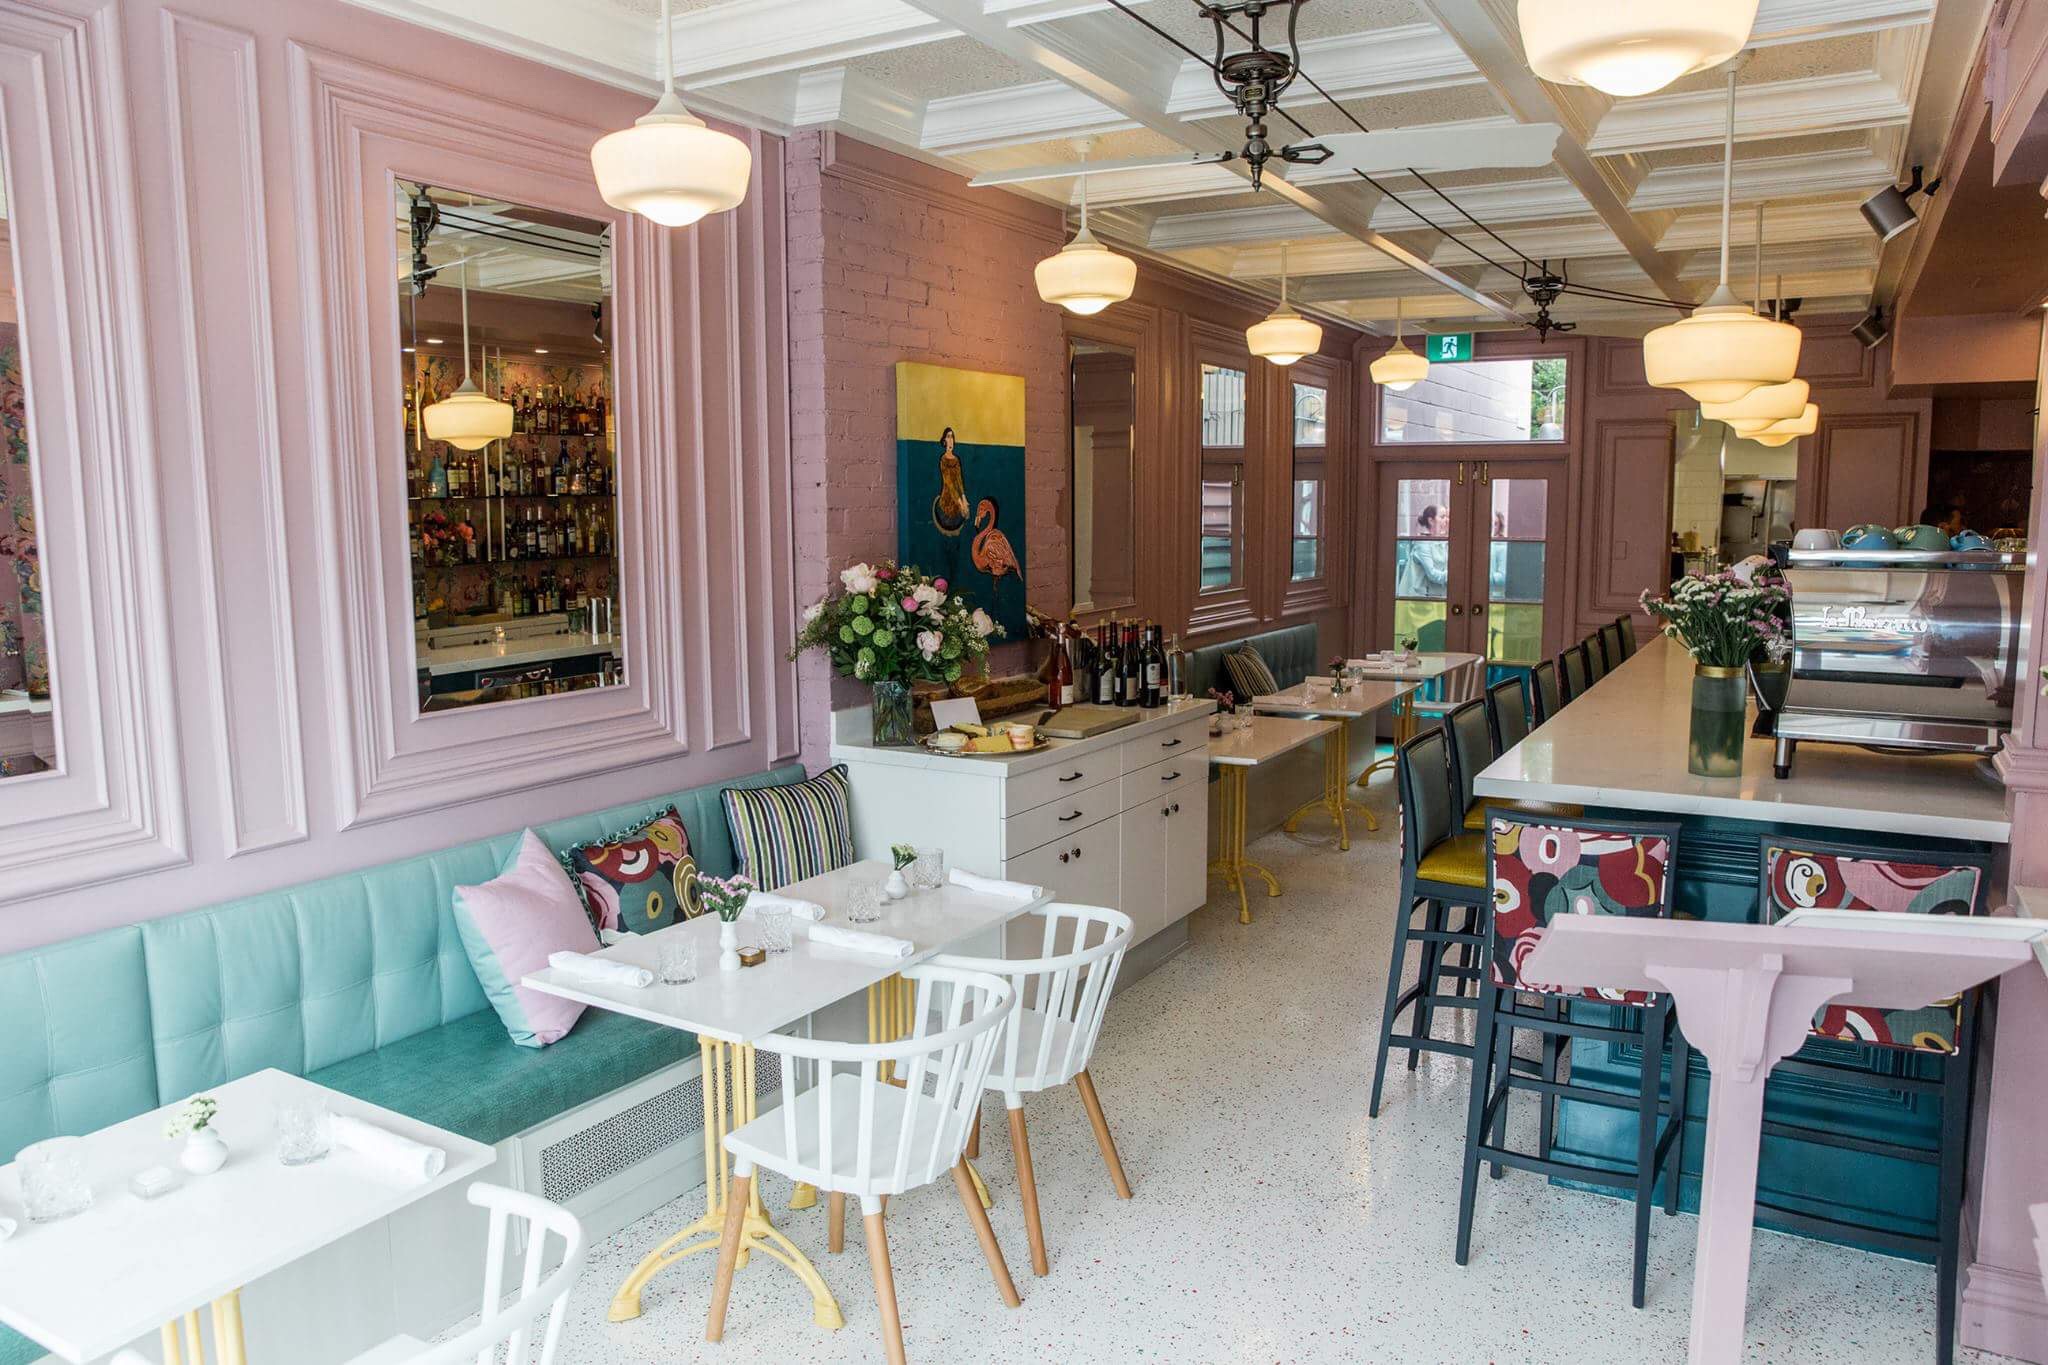 11. Cafe Cancan is Pretty in Pink